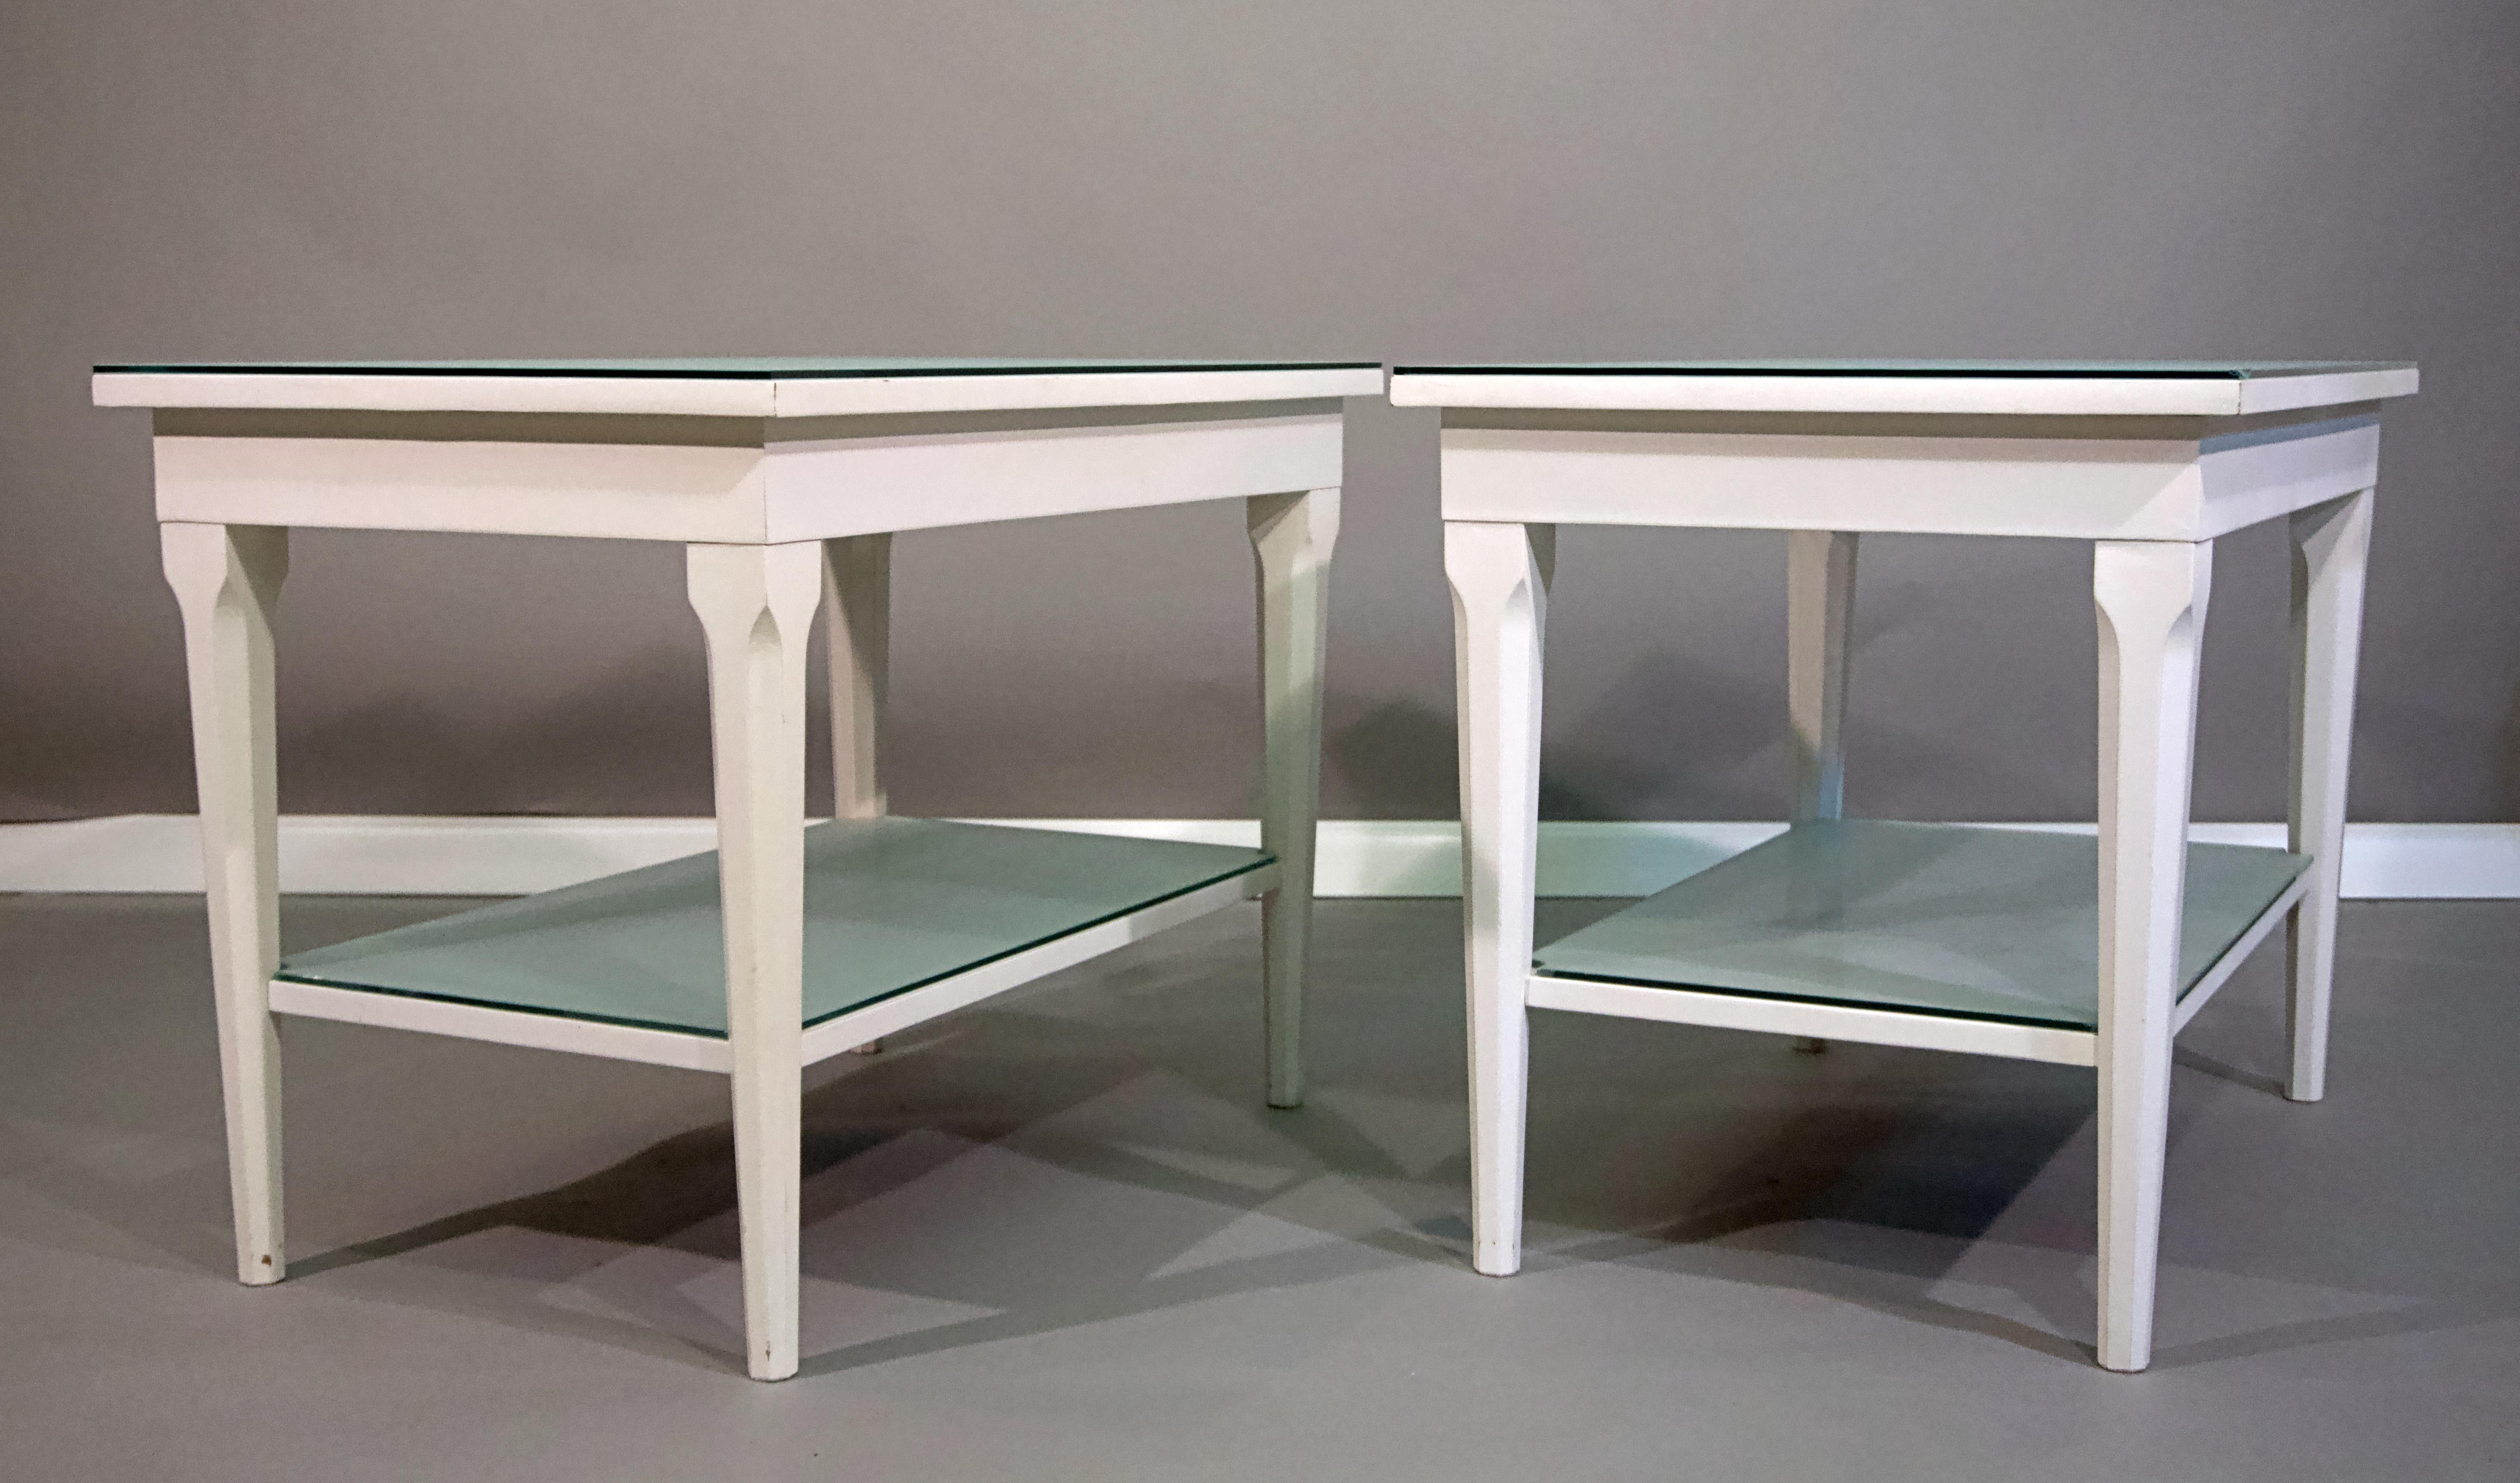 Pair of Louis XVI Jensen style of white painted side tables, spray matte was used for photo purposes.